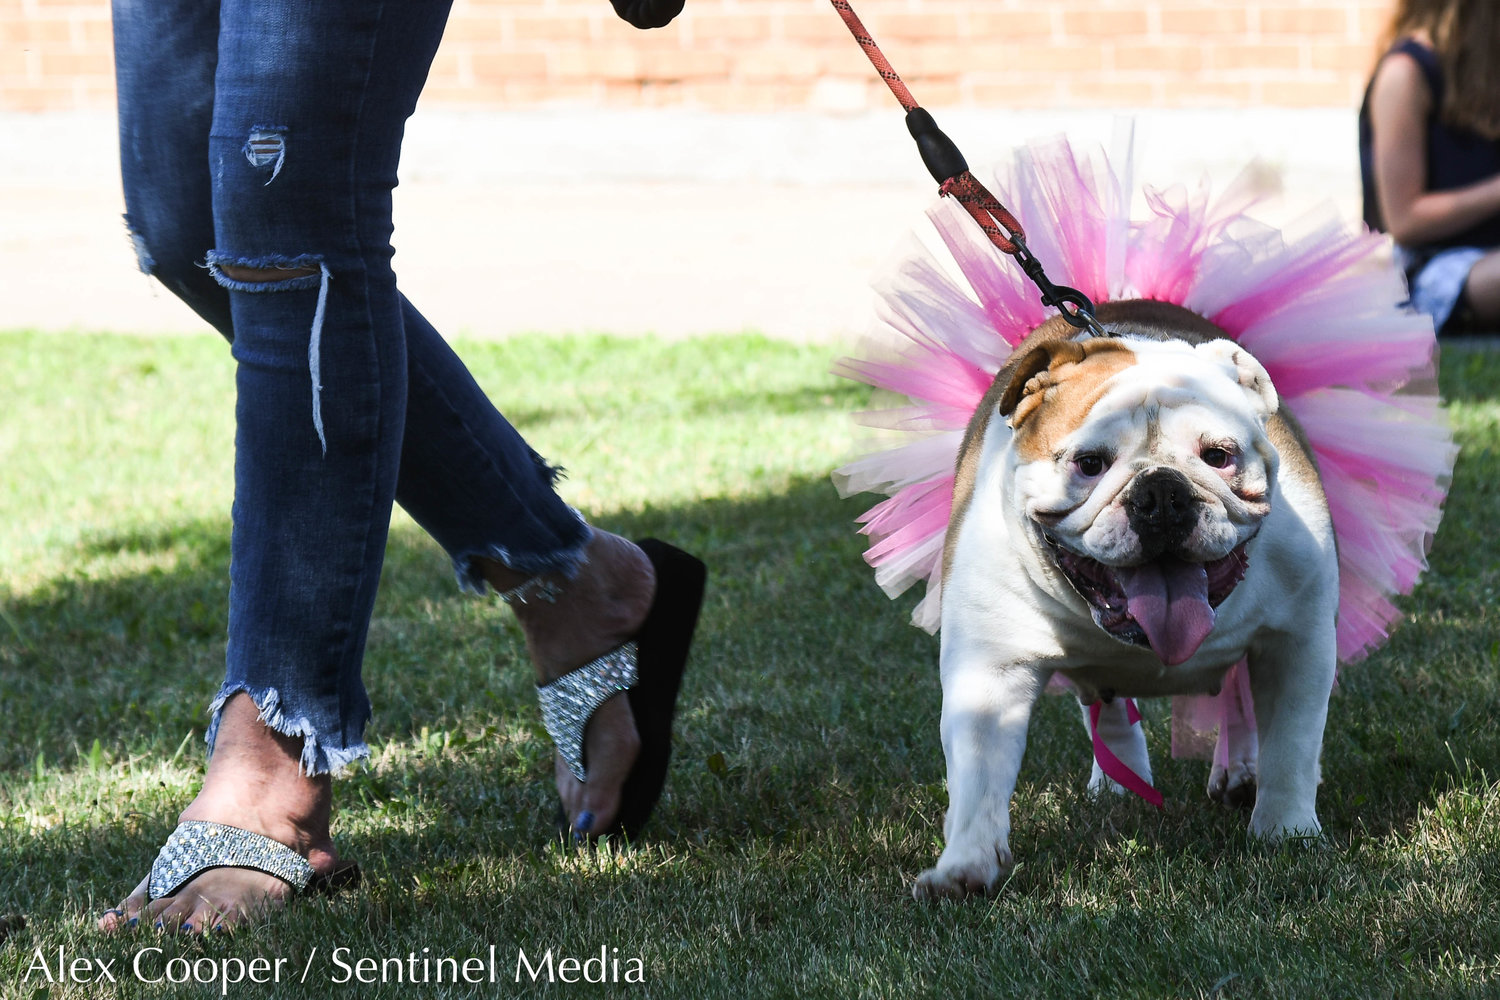 Winnie, an English bulldog, sports a tutu while participating in a dog show hosted by the Herkimer County Humane Society on Saturday at Central Plaza in Ilion. The show was part of a long list of events hosted during Ilion Days 2022 from July 16-24.